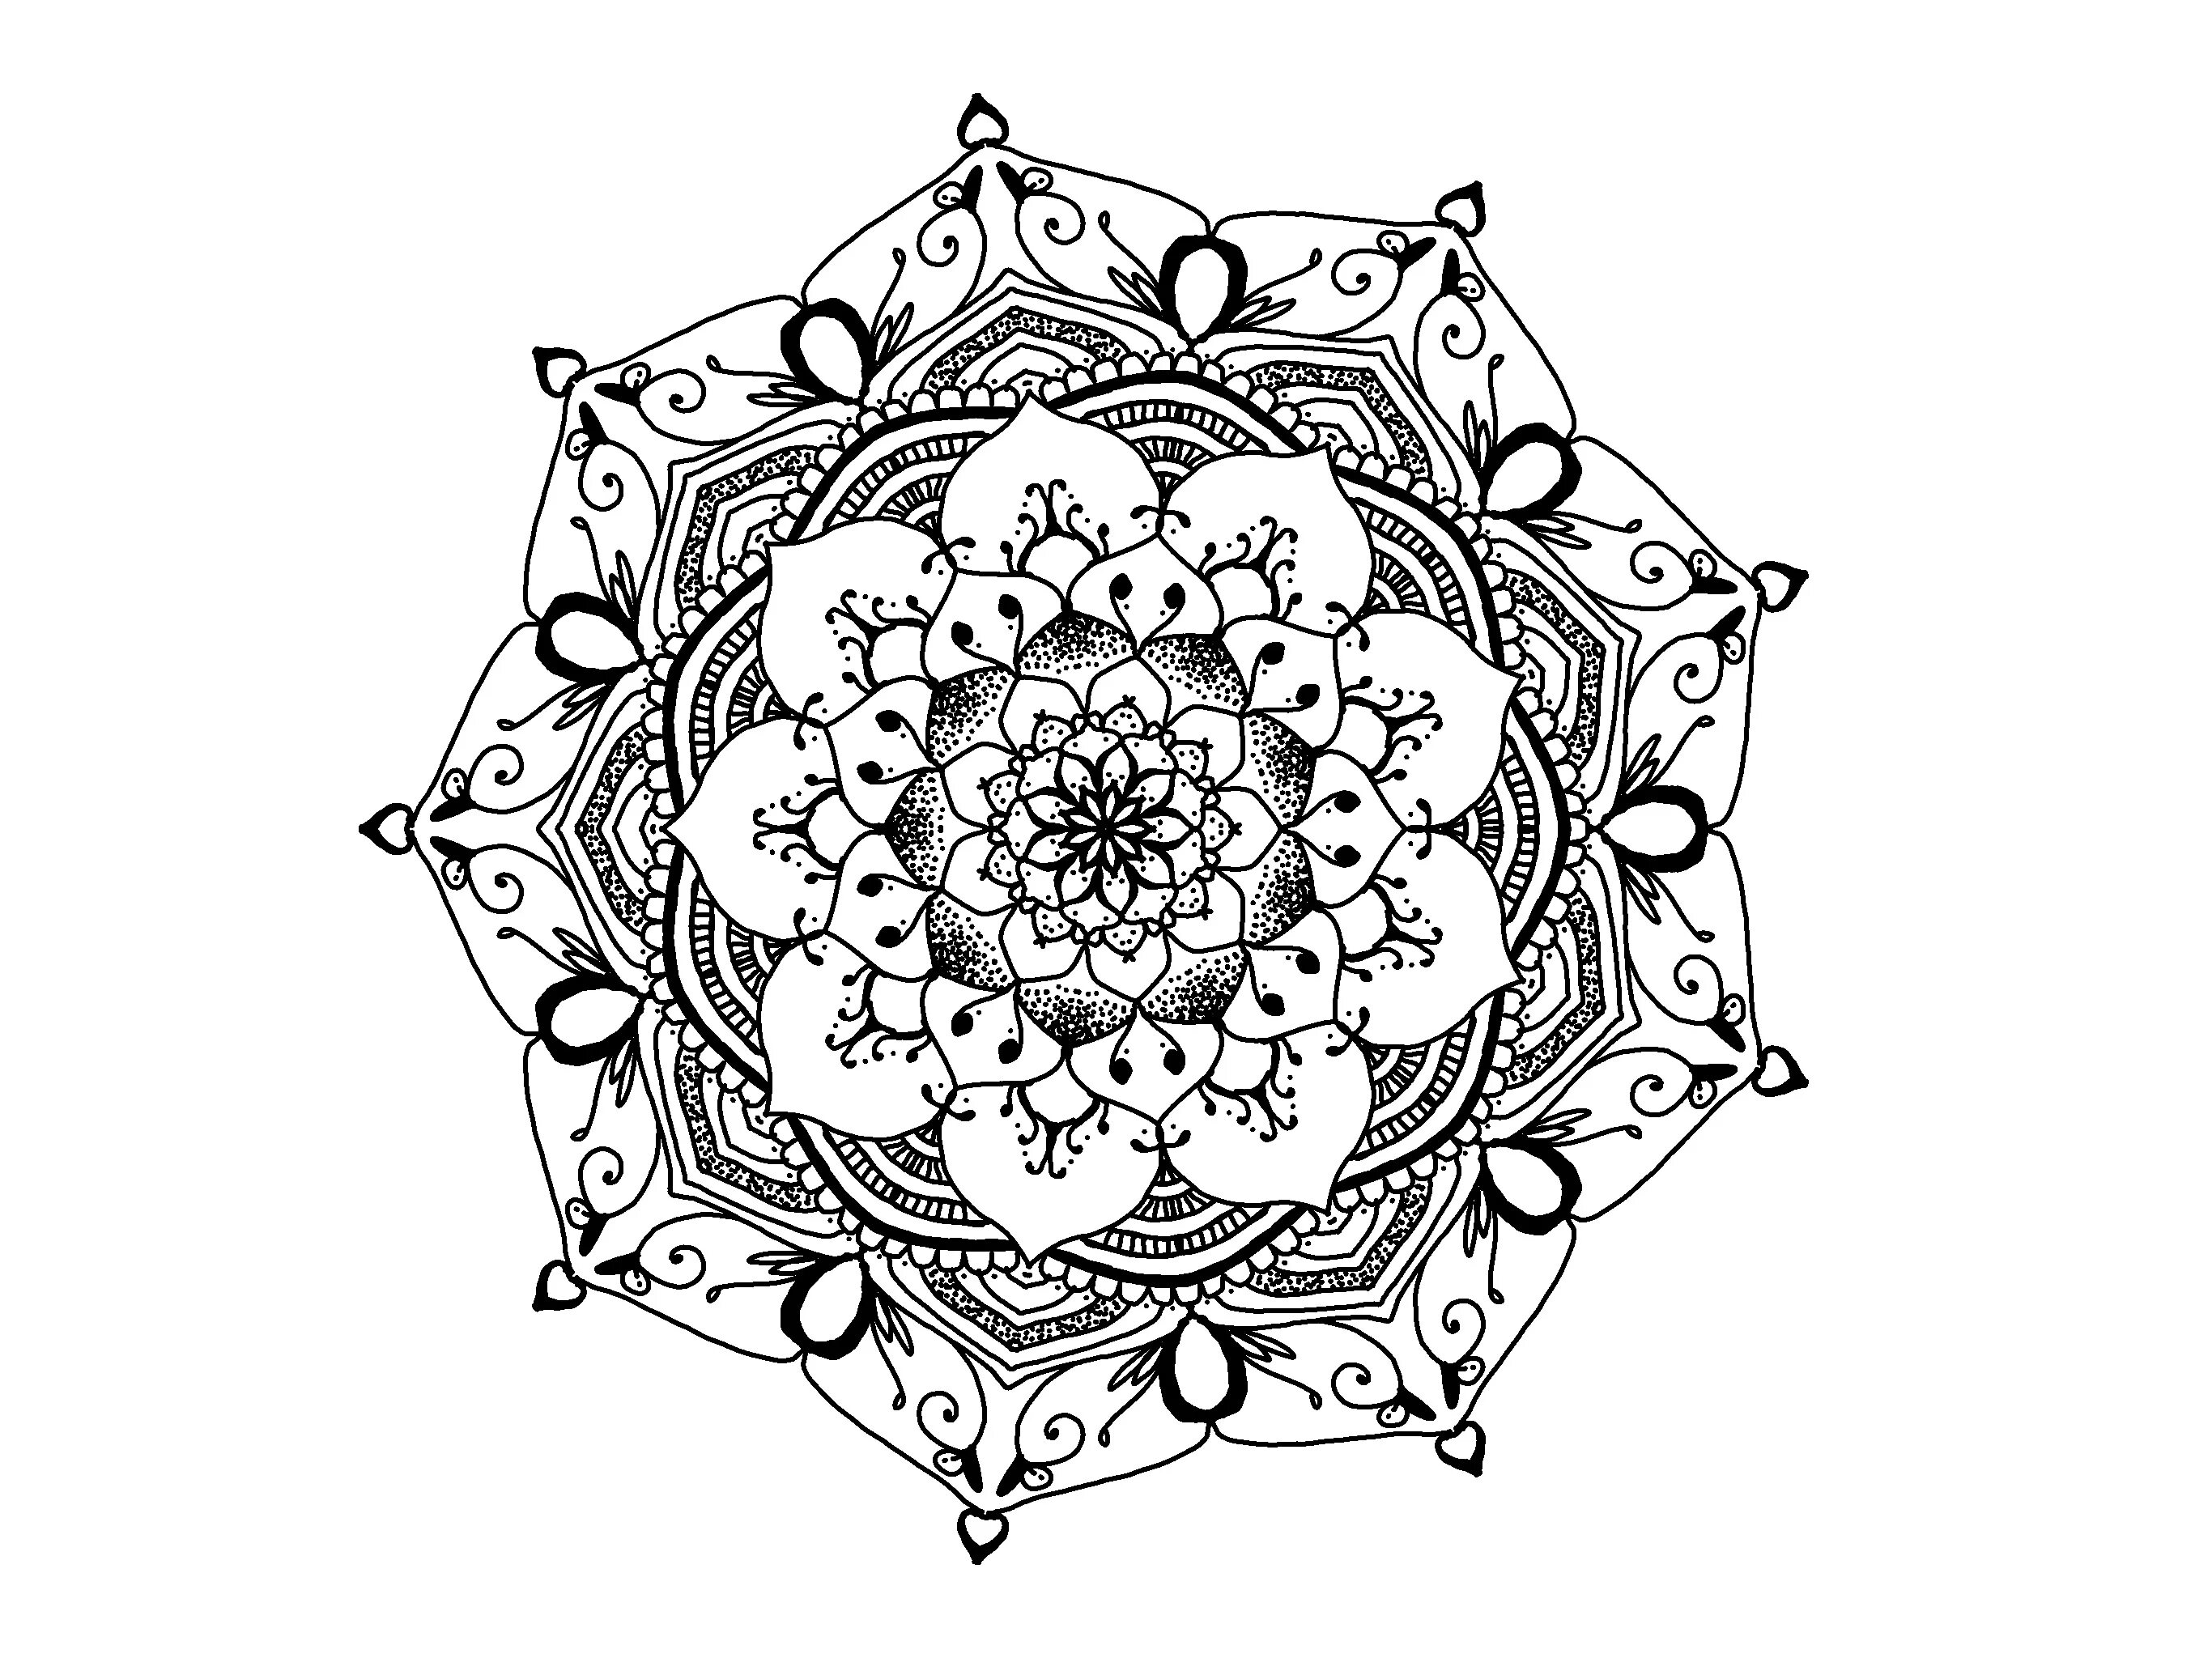 Mantra antistress amazing coloring book